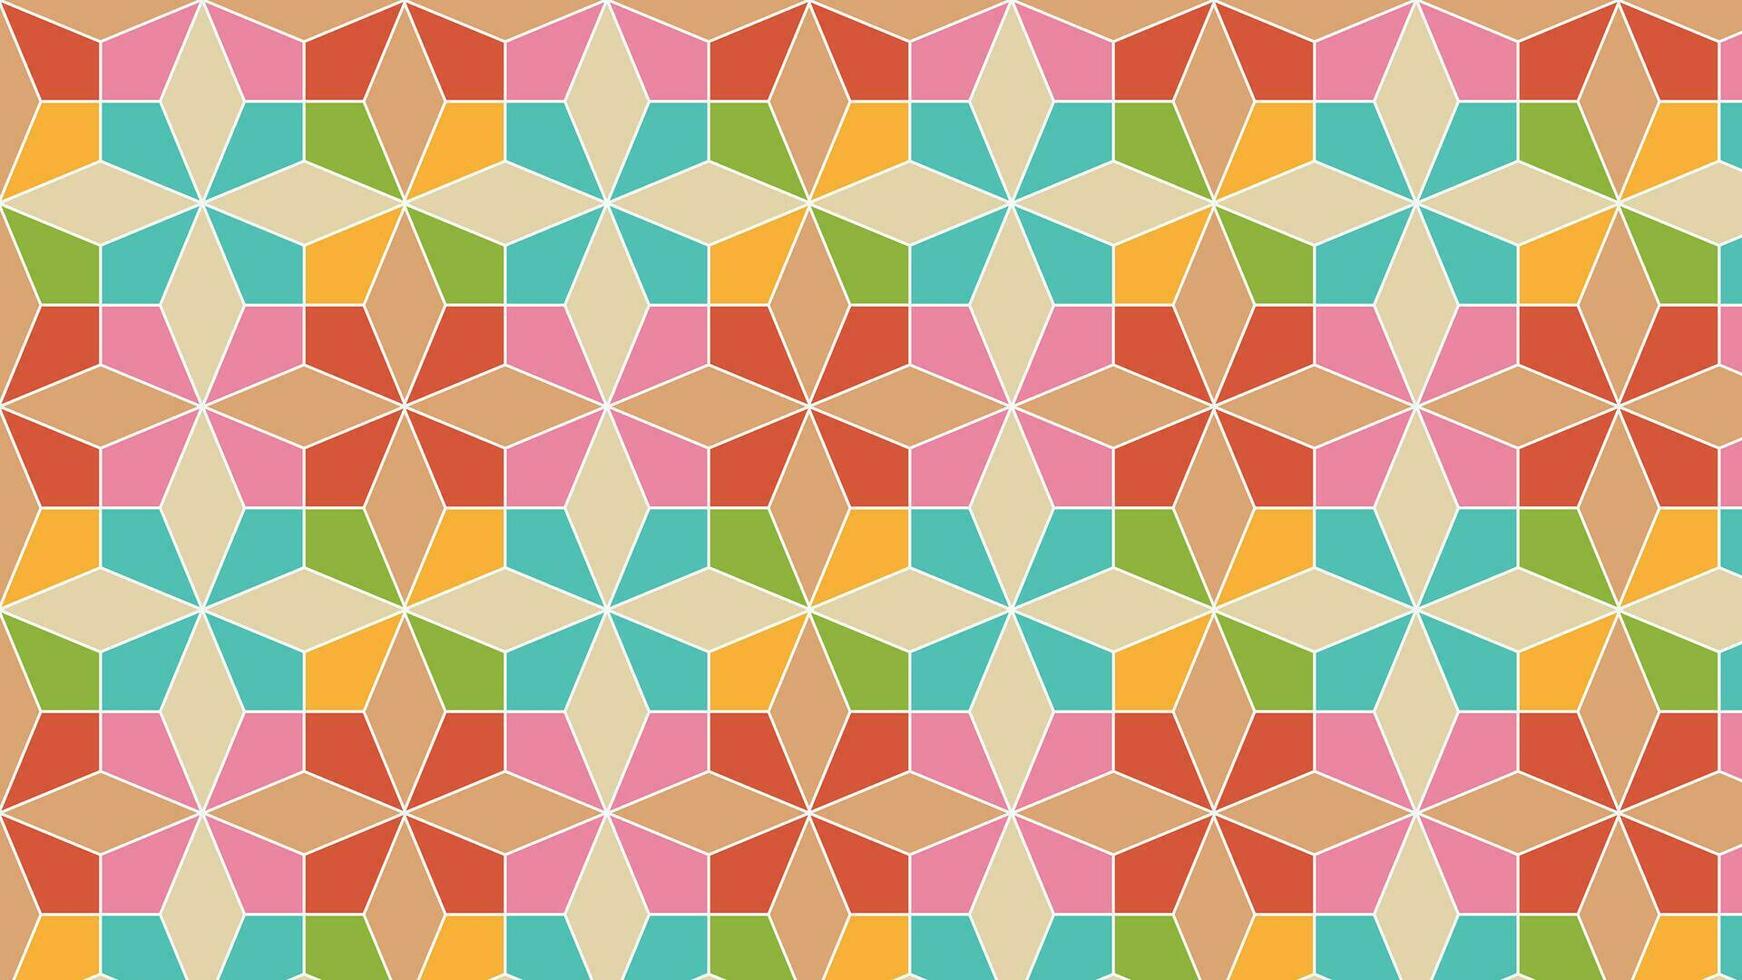 Abstract bright triangular mosaic tiles repeating pattern in different bright colors vector